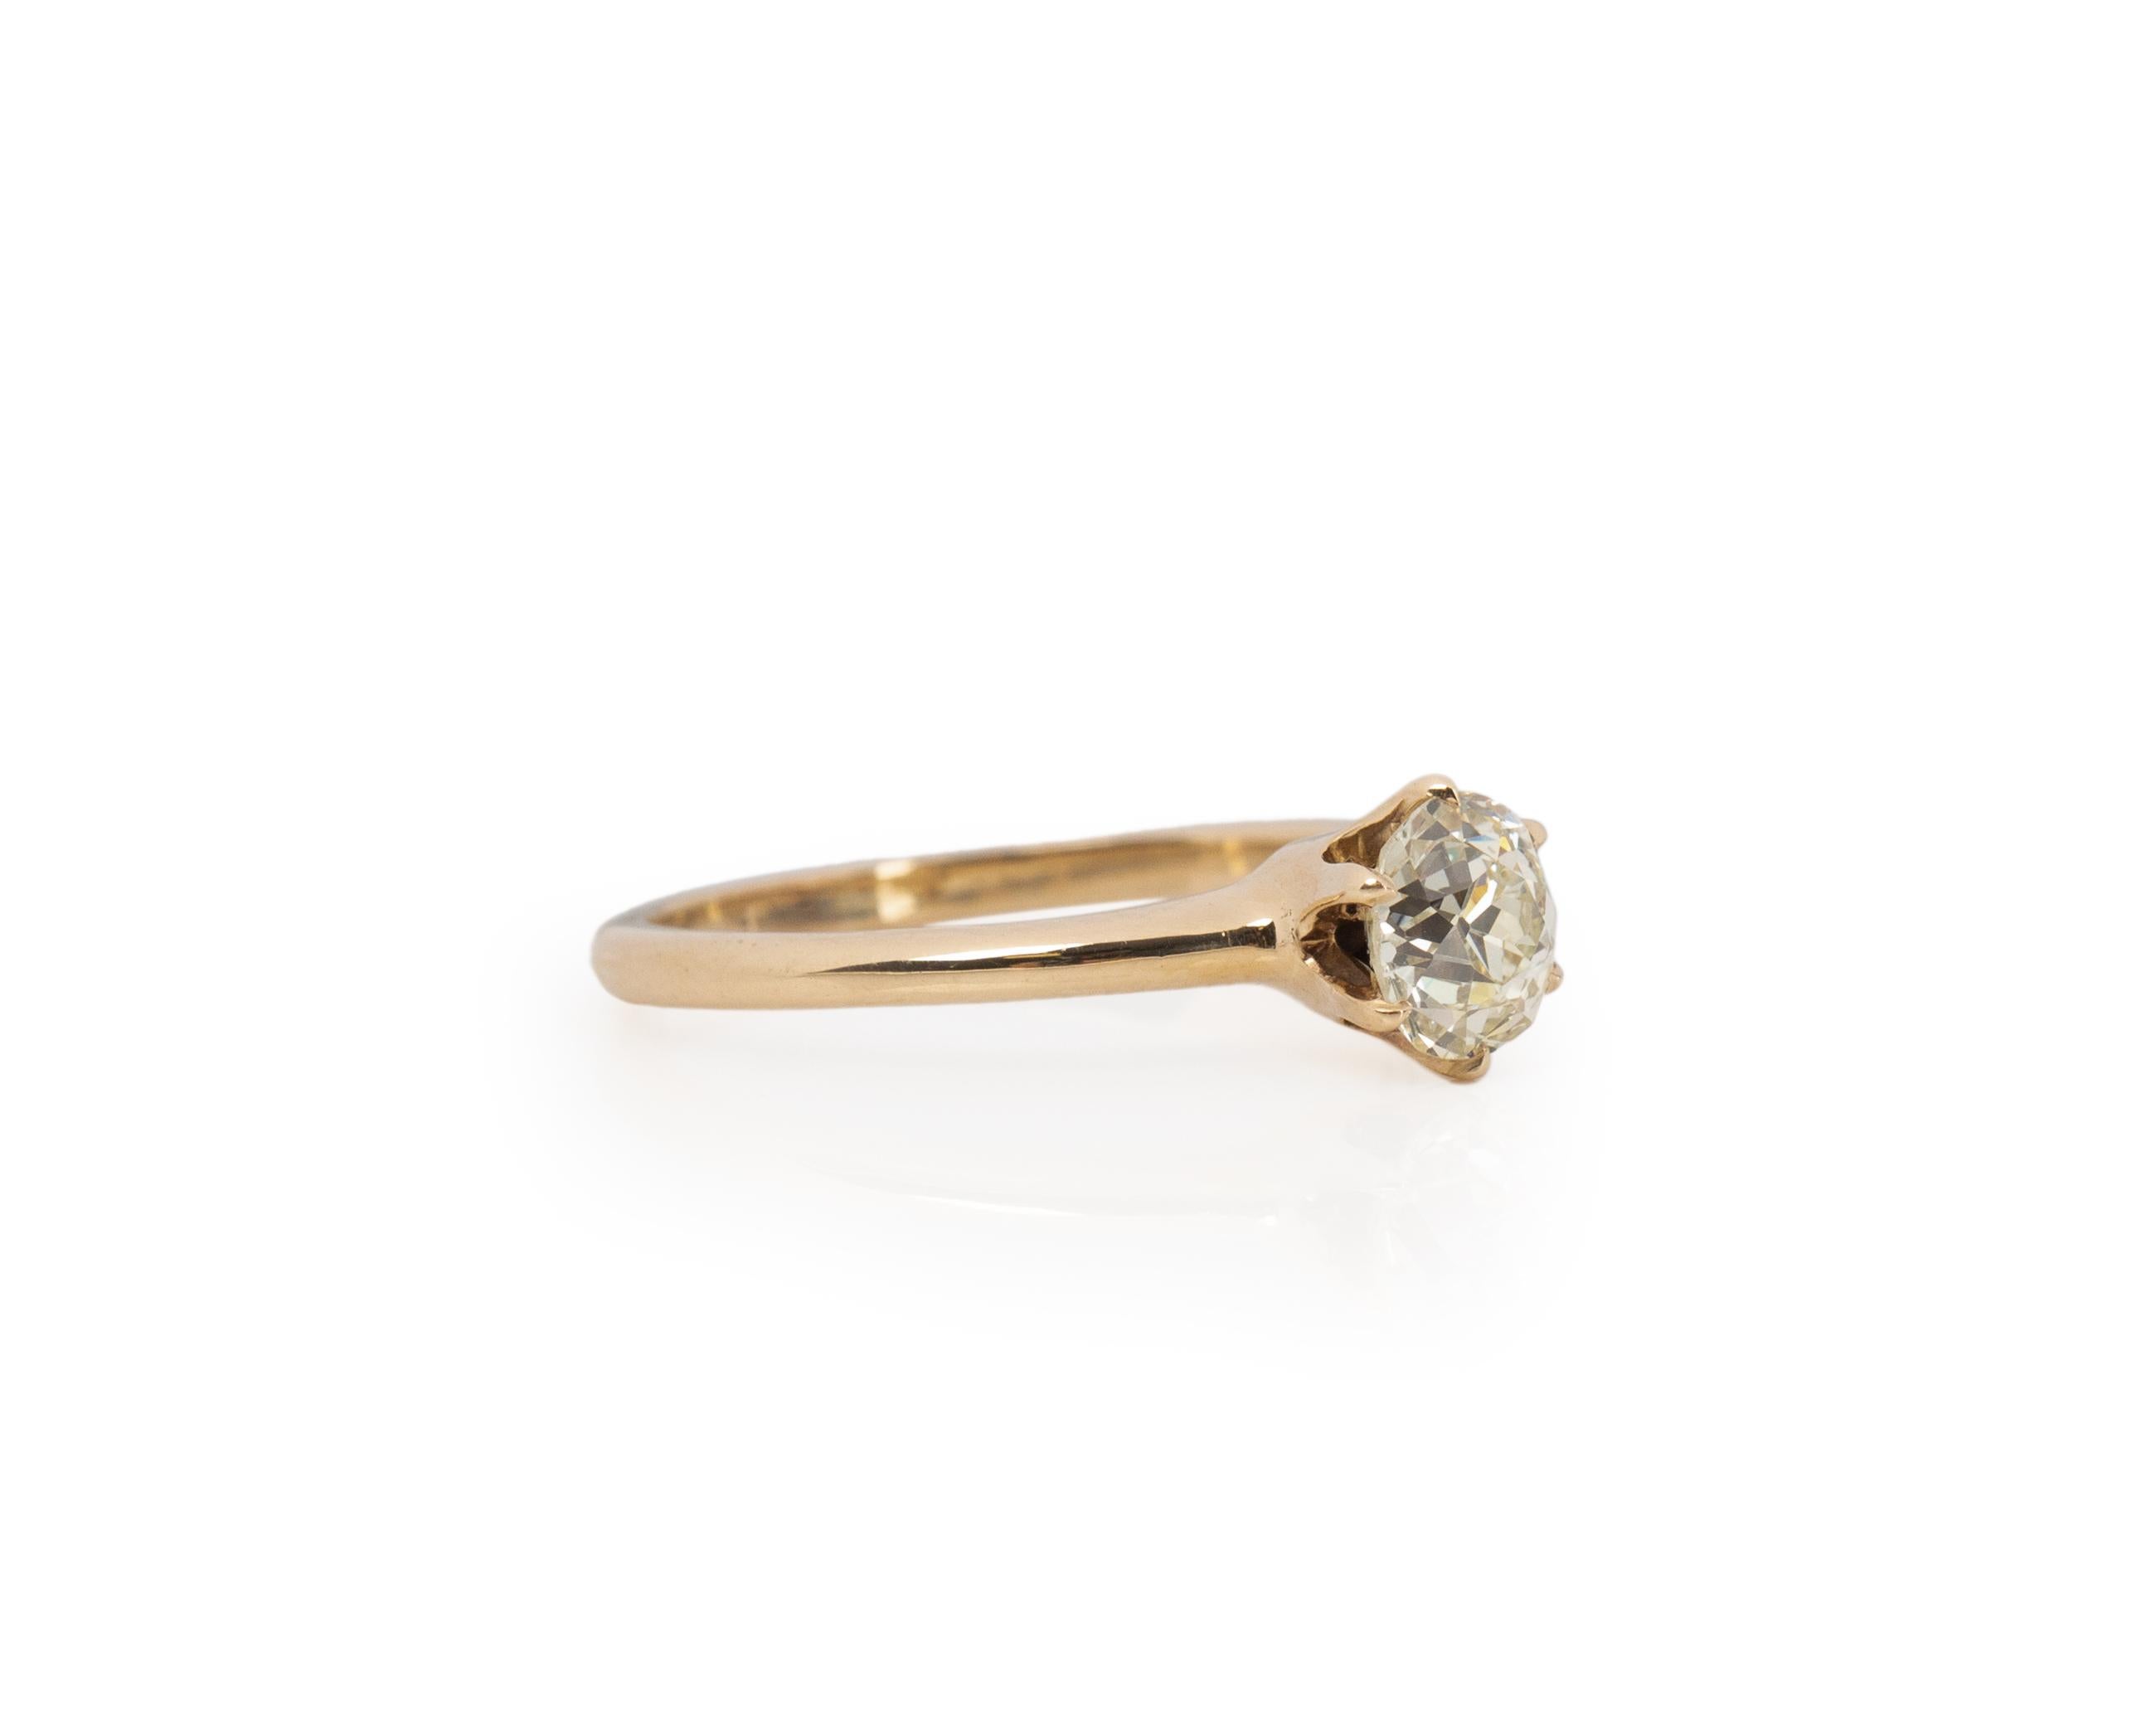 Ring Size: 9
Metal Type: 14K Yellow Gold [Hallmarked, and Tested]
Weight: 3.3 grams

Center Diamond Details:
Weight: 1.20ct
Cut: Old European brilliant
Color: M
Clarity: VS1

Finger to Top of Stone Measurement: 6.0mm
Shank/Band Width: